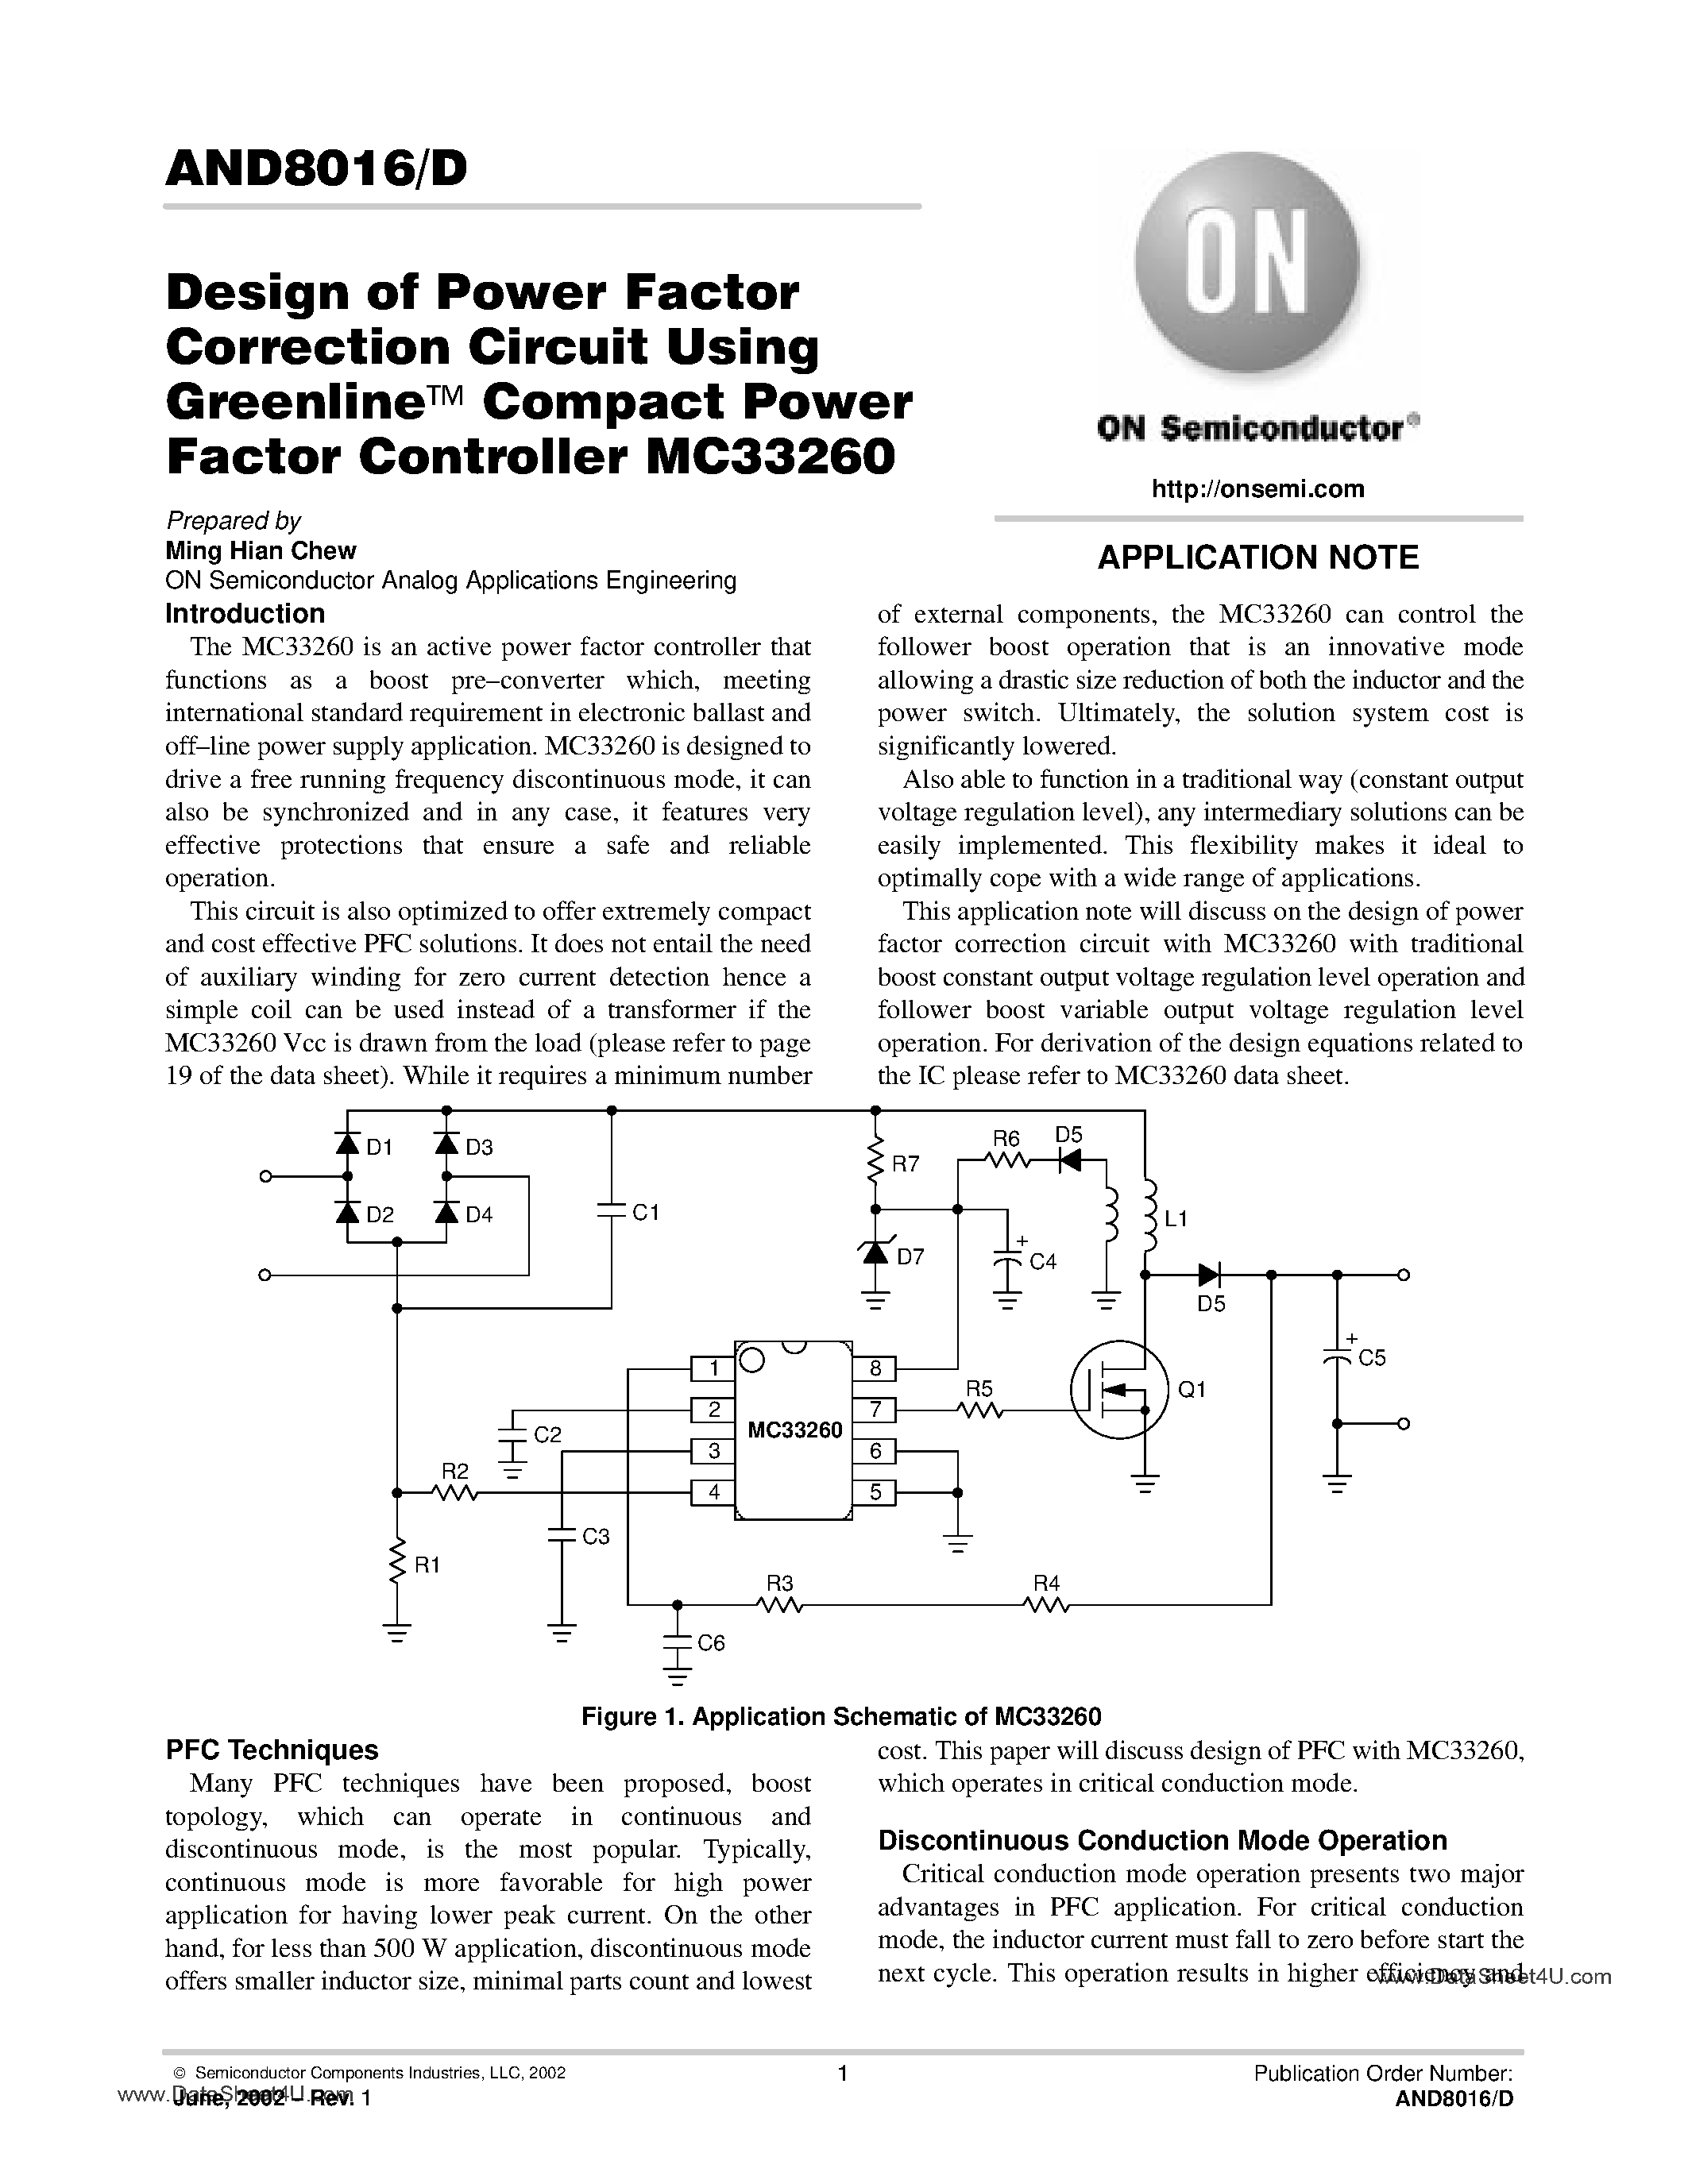 Datasheet AND8016/D - Design of Power Factor Correction Circuit Using Greenline Compact Power Factor Controller page 1